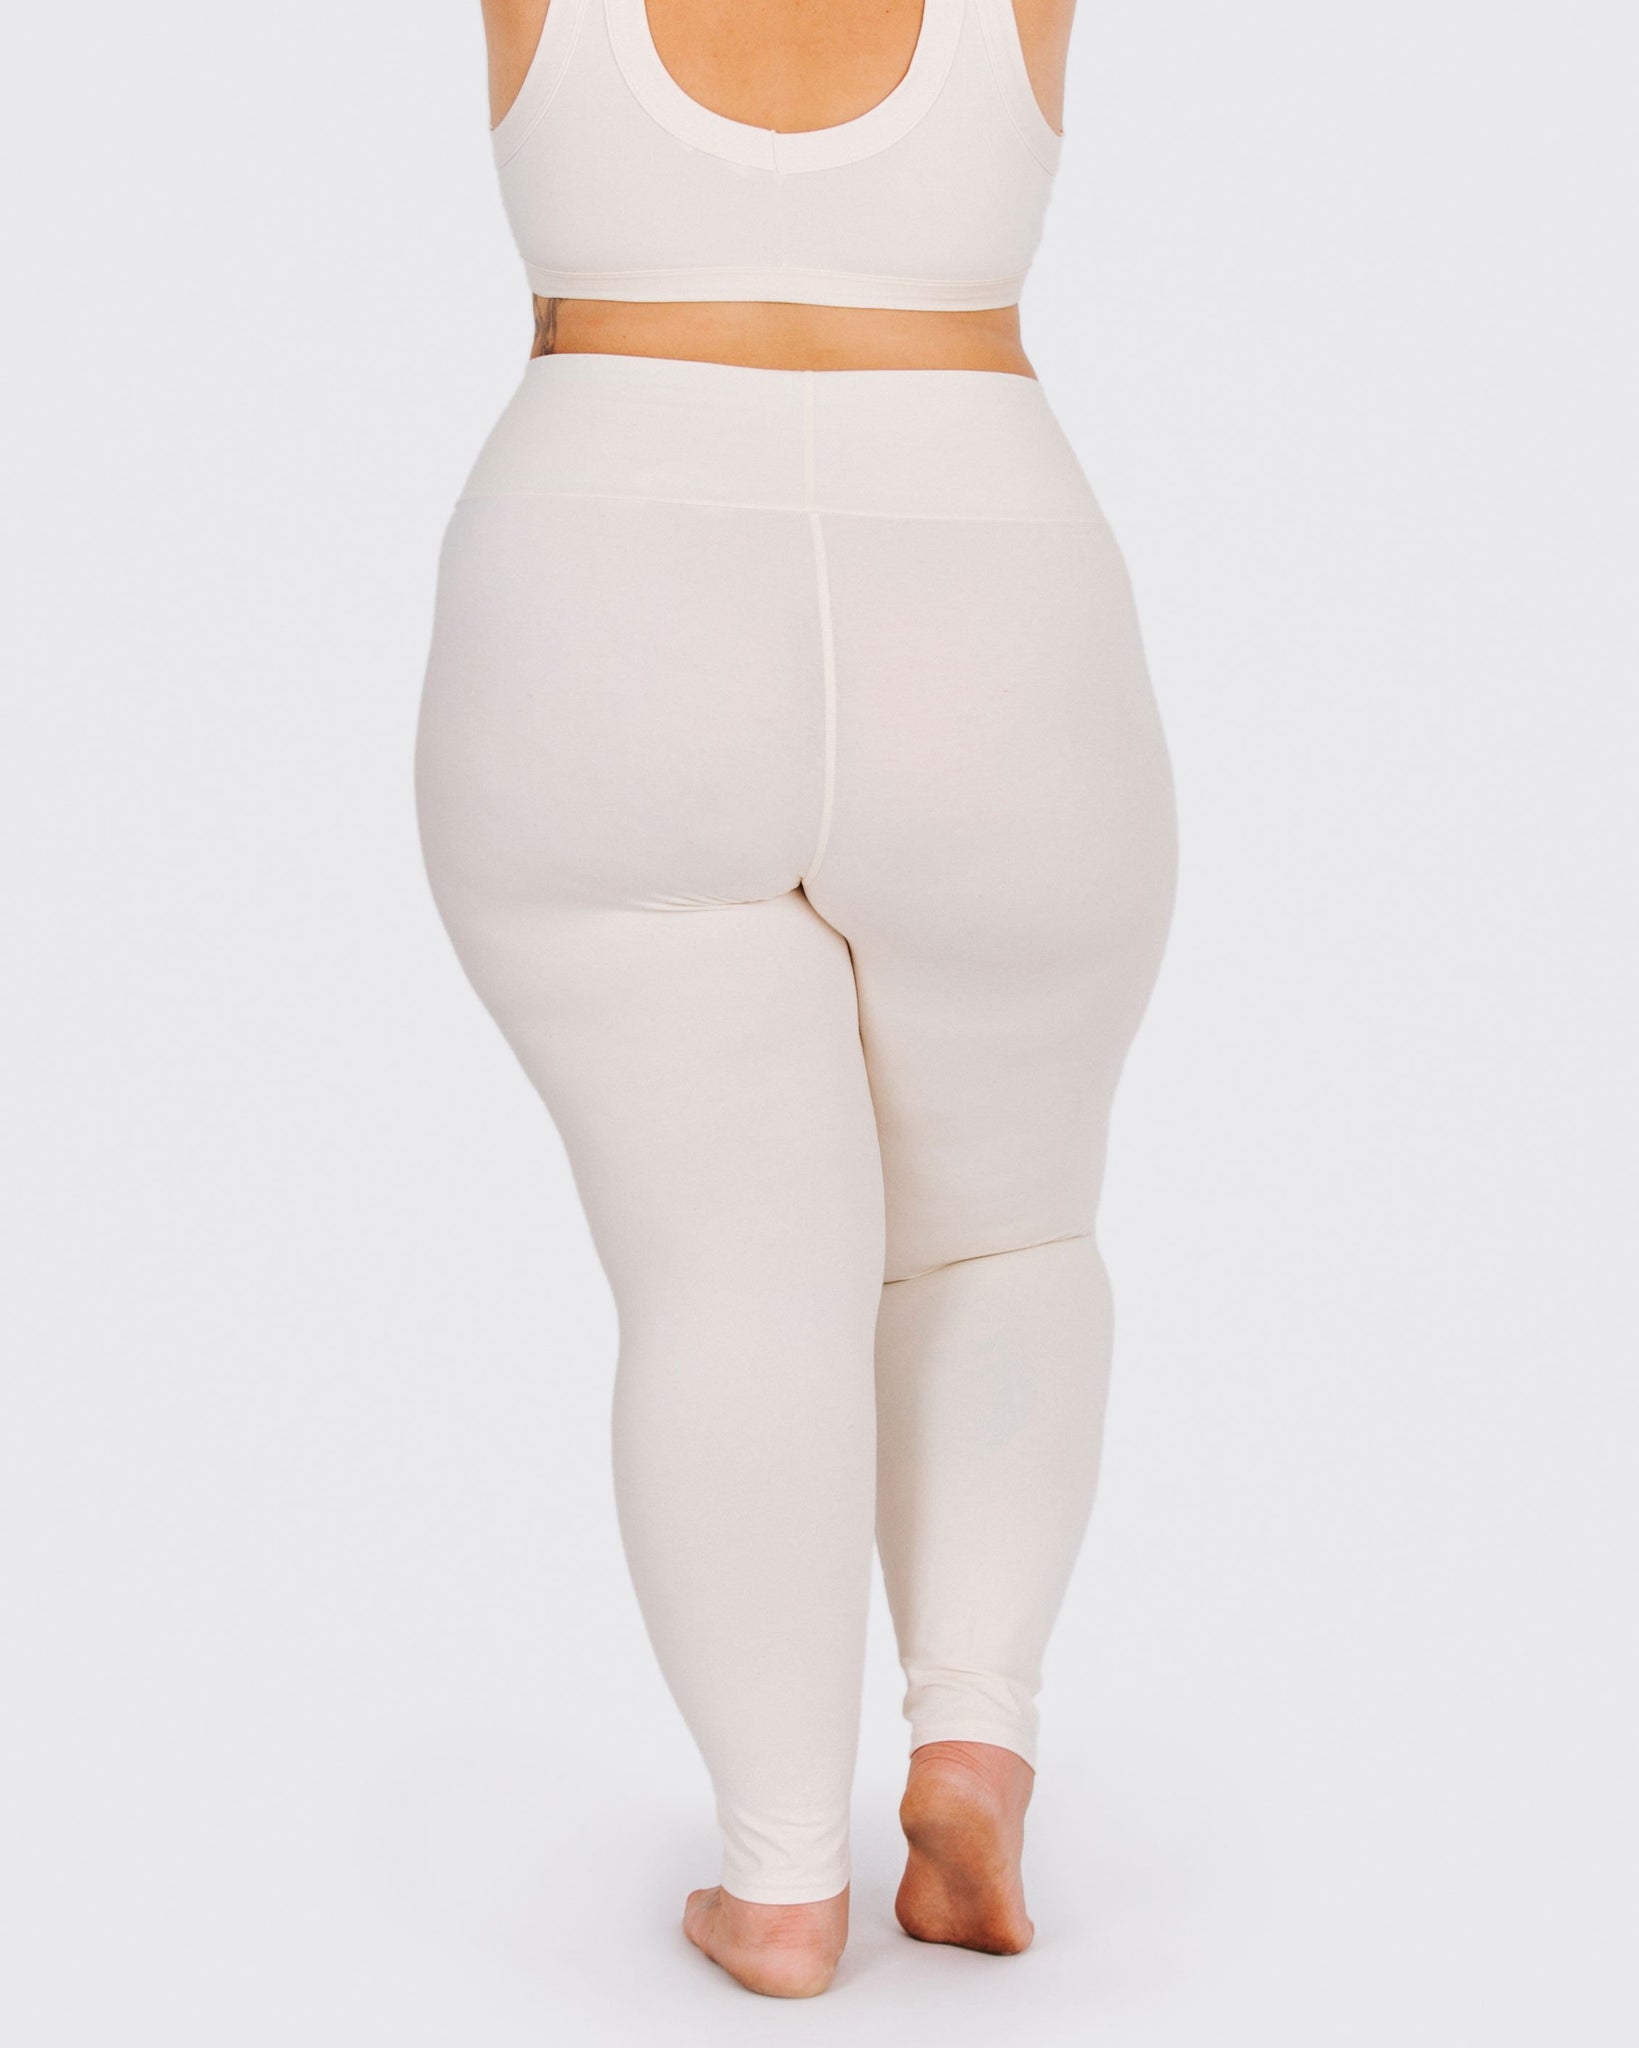 LTS MADE FOR GOOD White Organic Stretch Cotton Leggings – Search